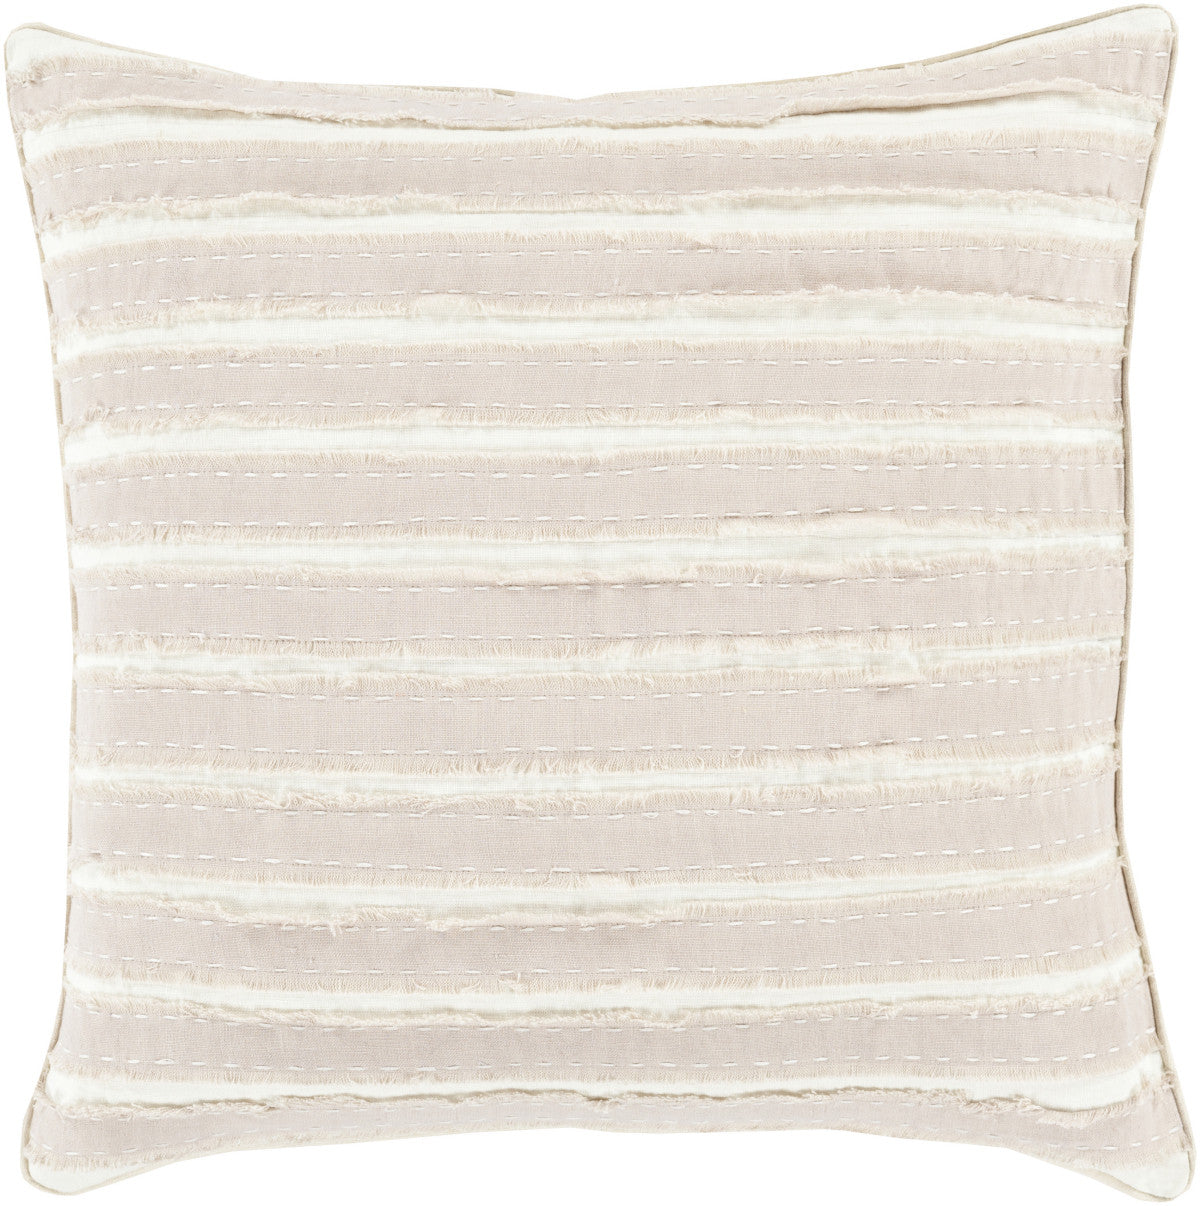 Surya Willow Charm and Comfort WO-002 Pillow